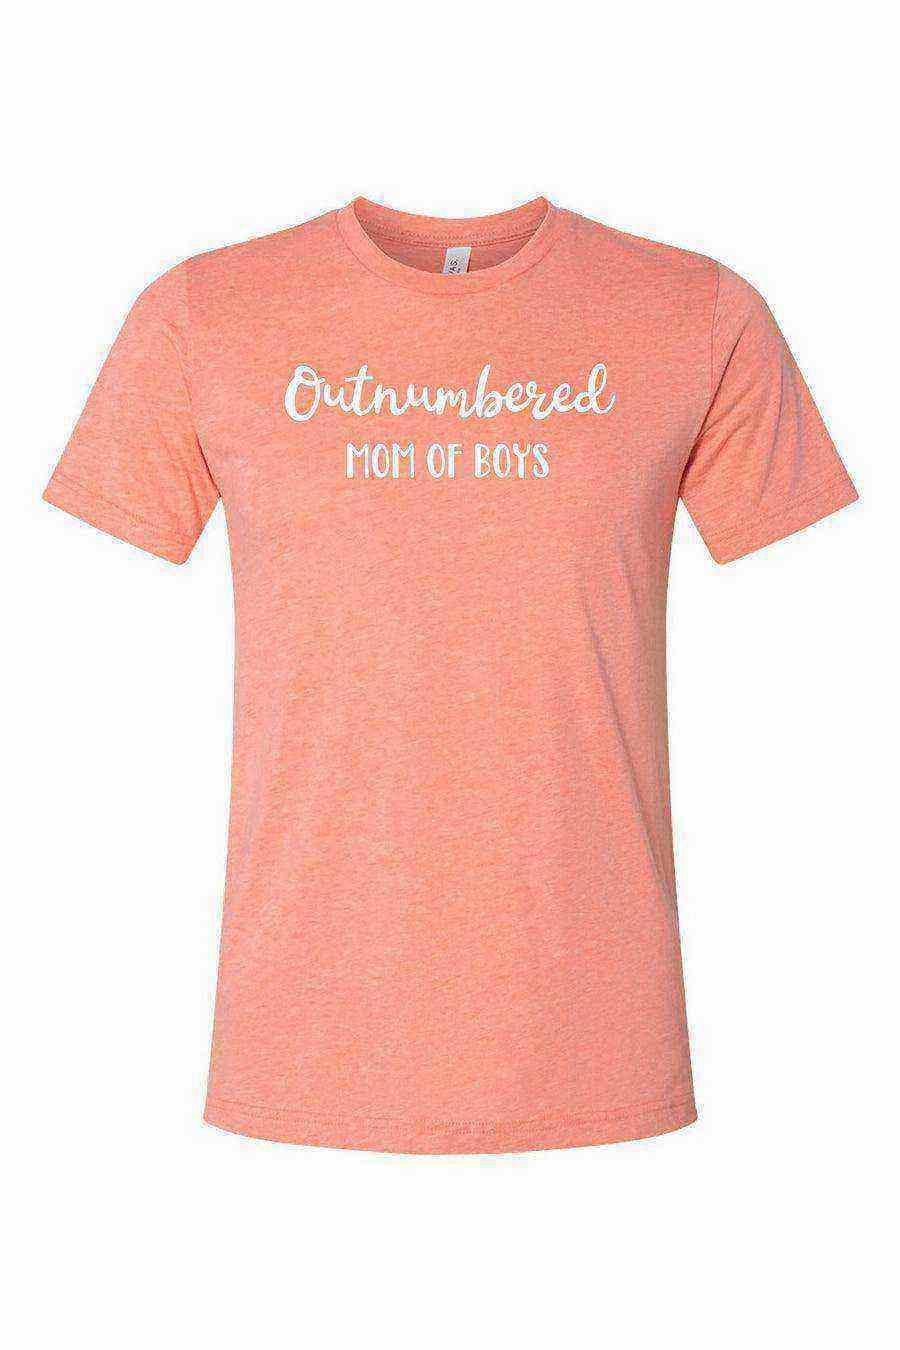 Toddler | Outnumbered Mom Of Boys Shirt - Dylan's Tees